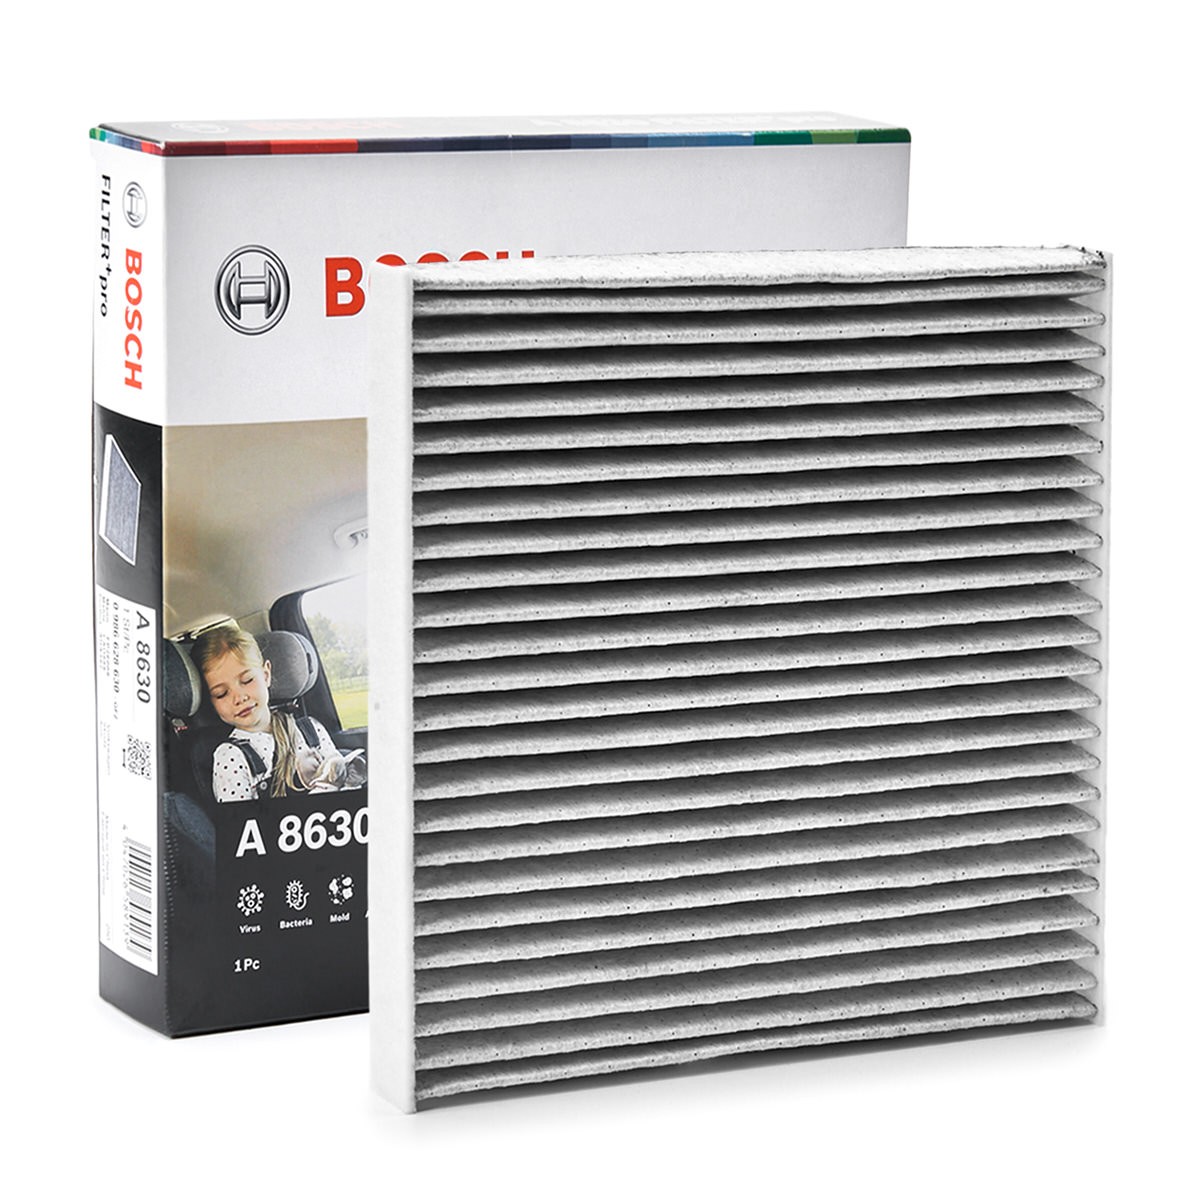 Cabin air filter 0 986 628 630 review